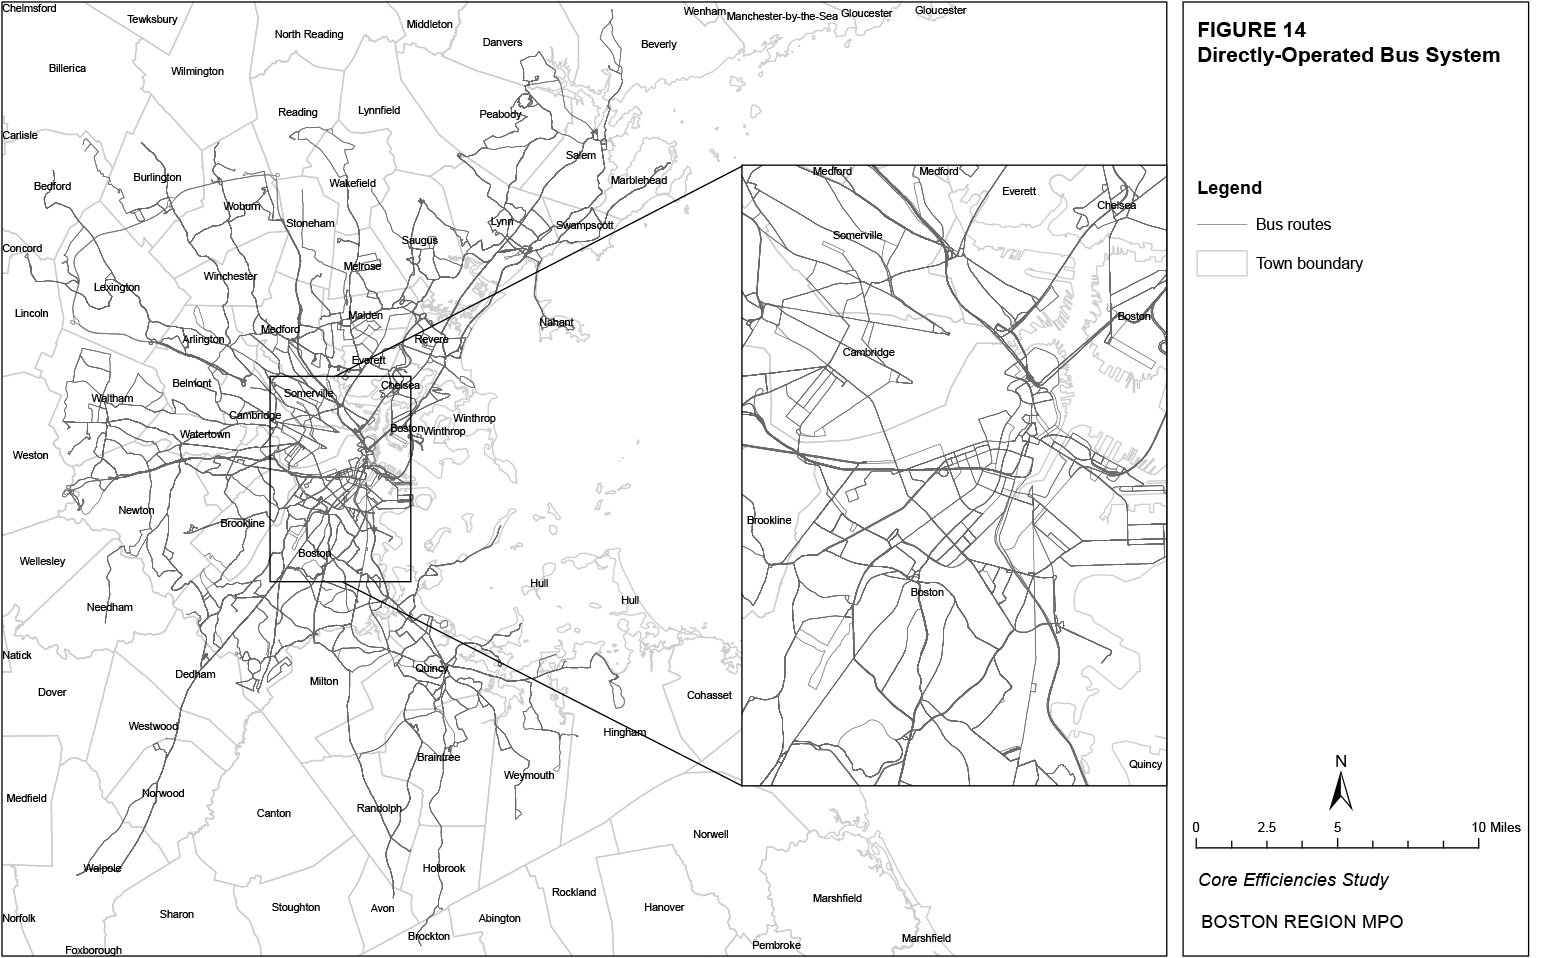 This map shows the bus routes in the MBTA directly-operated bus system.